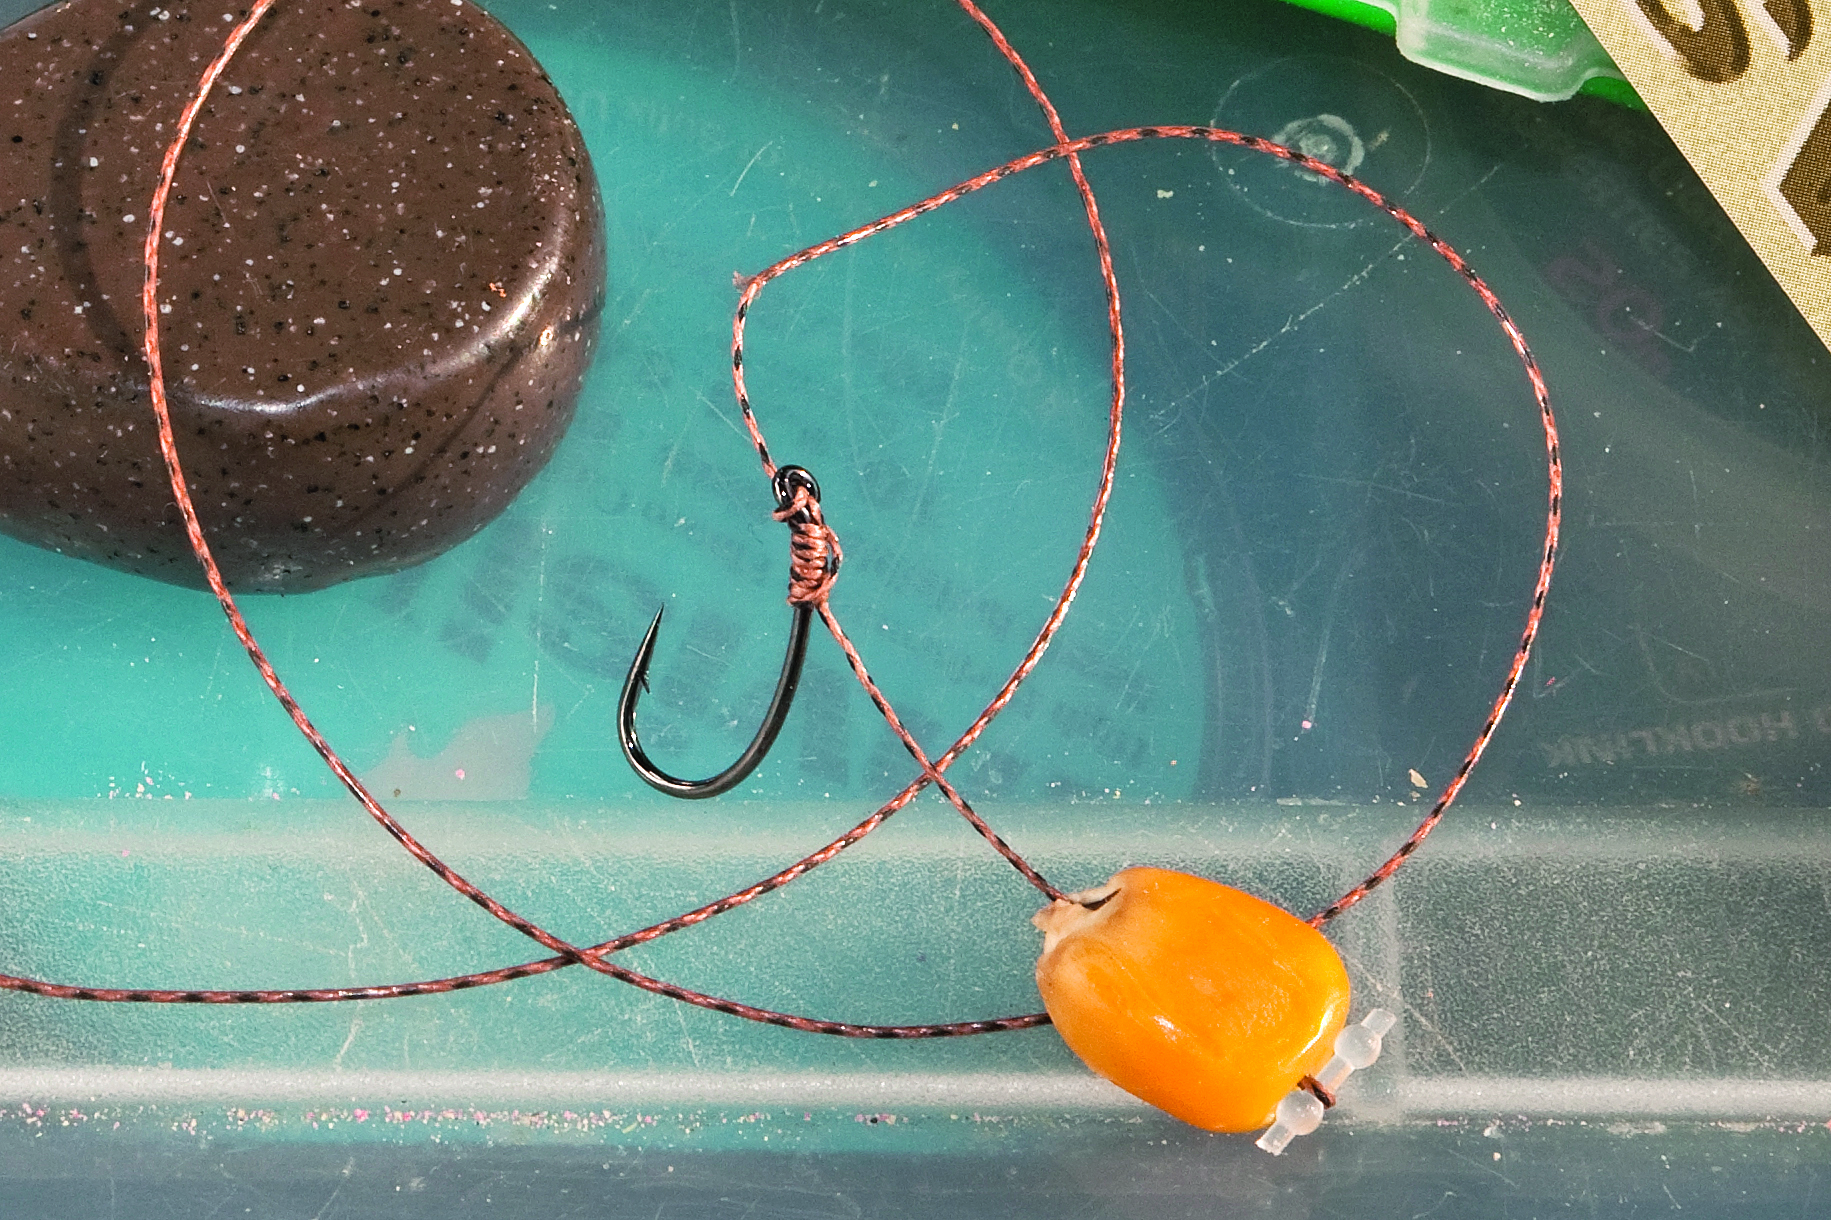 Looking for a bait as effective as a boilie? Try hair-rigged maize.